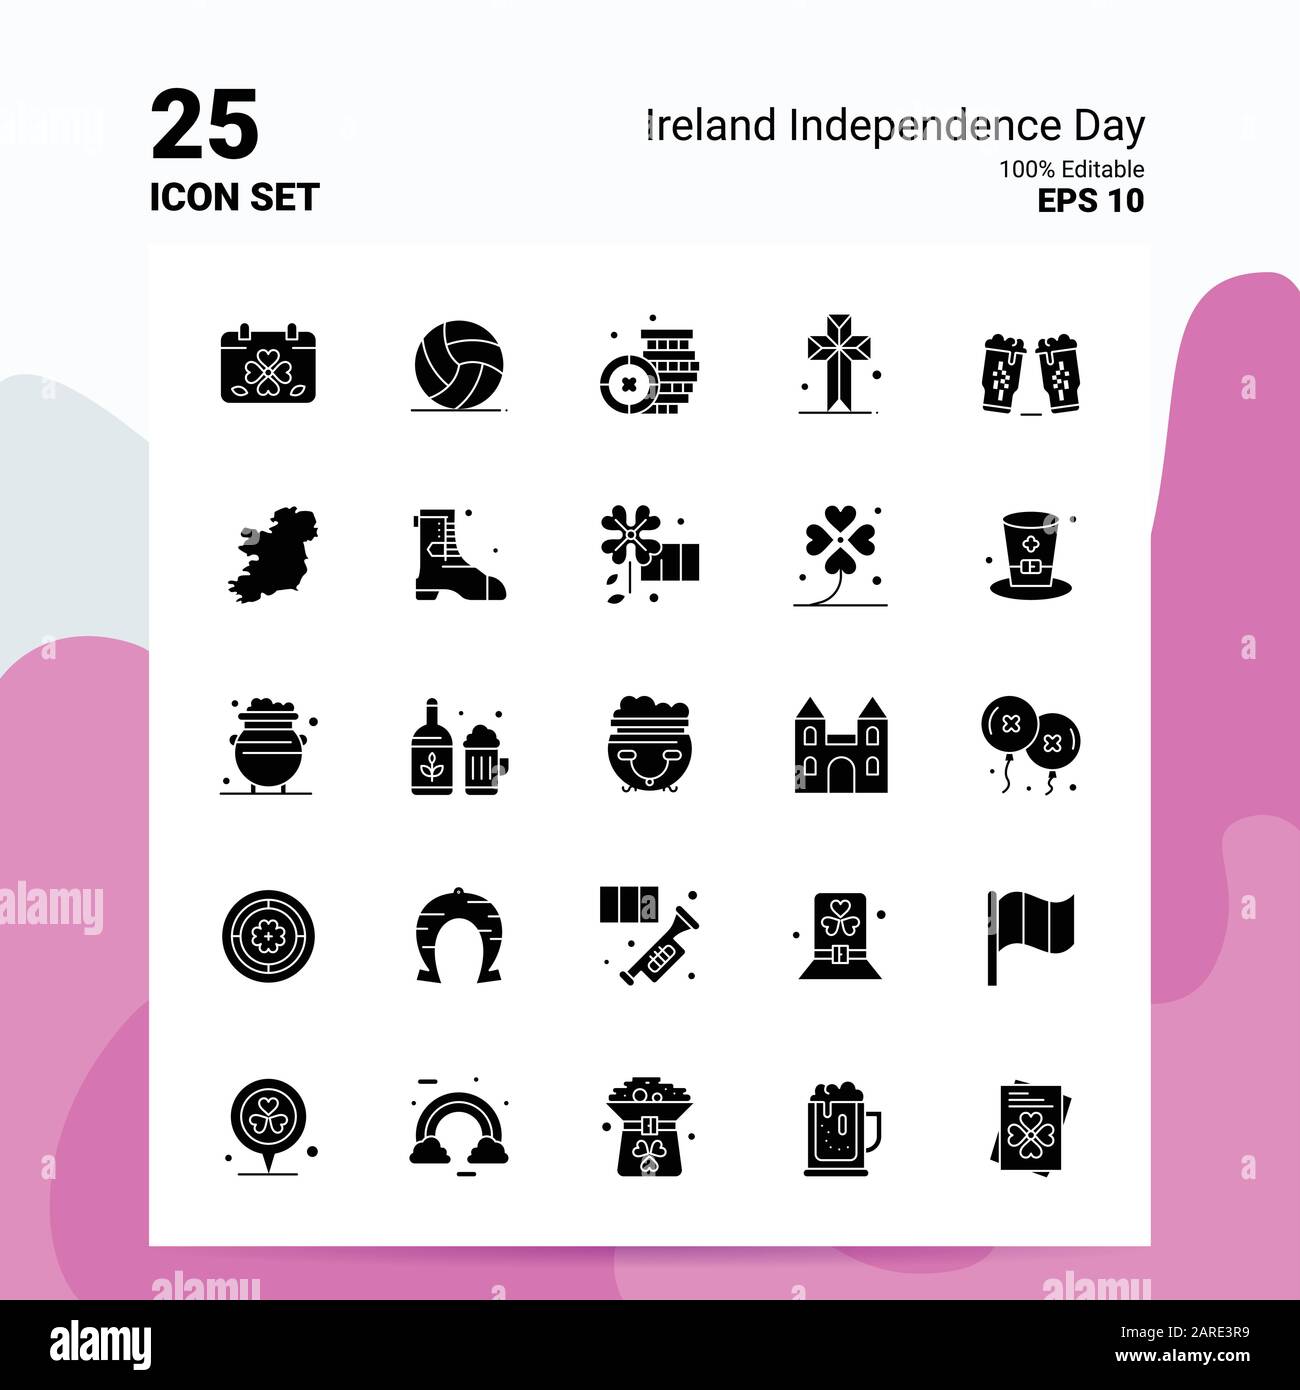 25 Ireland Independence Day Icon Set. 100% Editable EPS 10 Files. Business Logo Concept Ideas Solid Glyph icon design Stock Vector